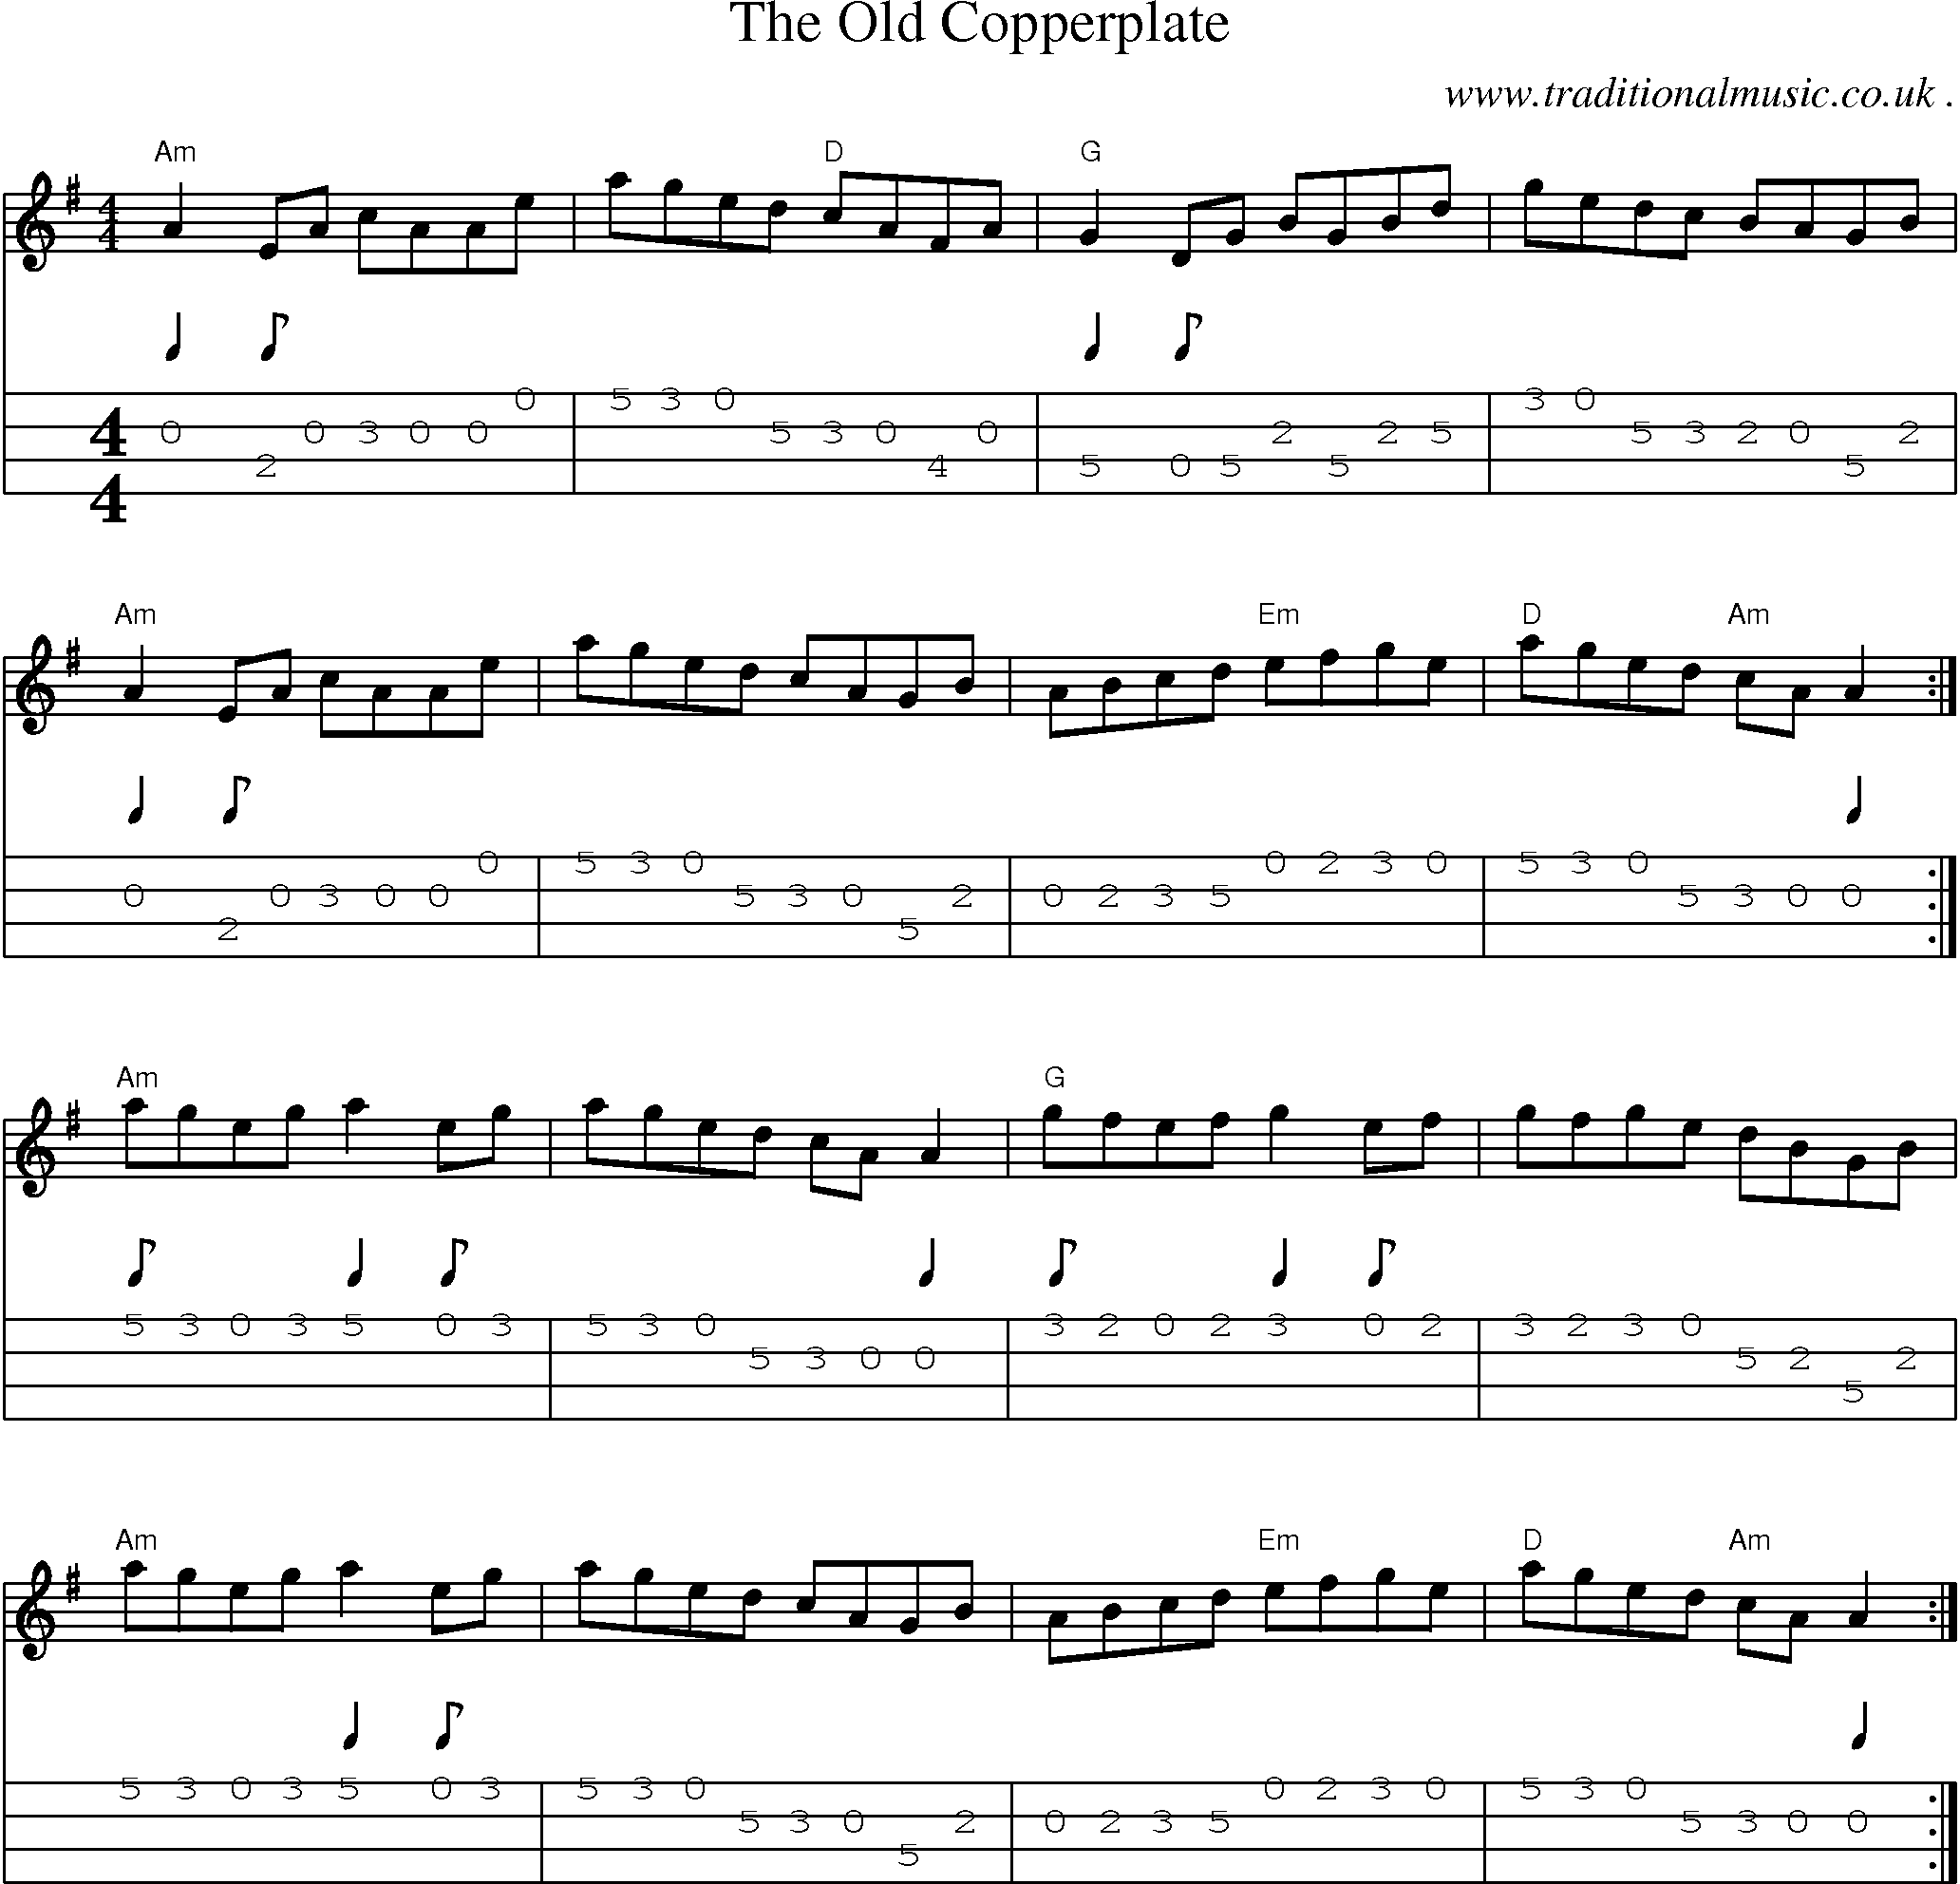 Music Score and Guitar Tabs for The Old Copperplate